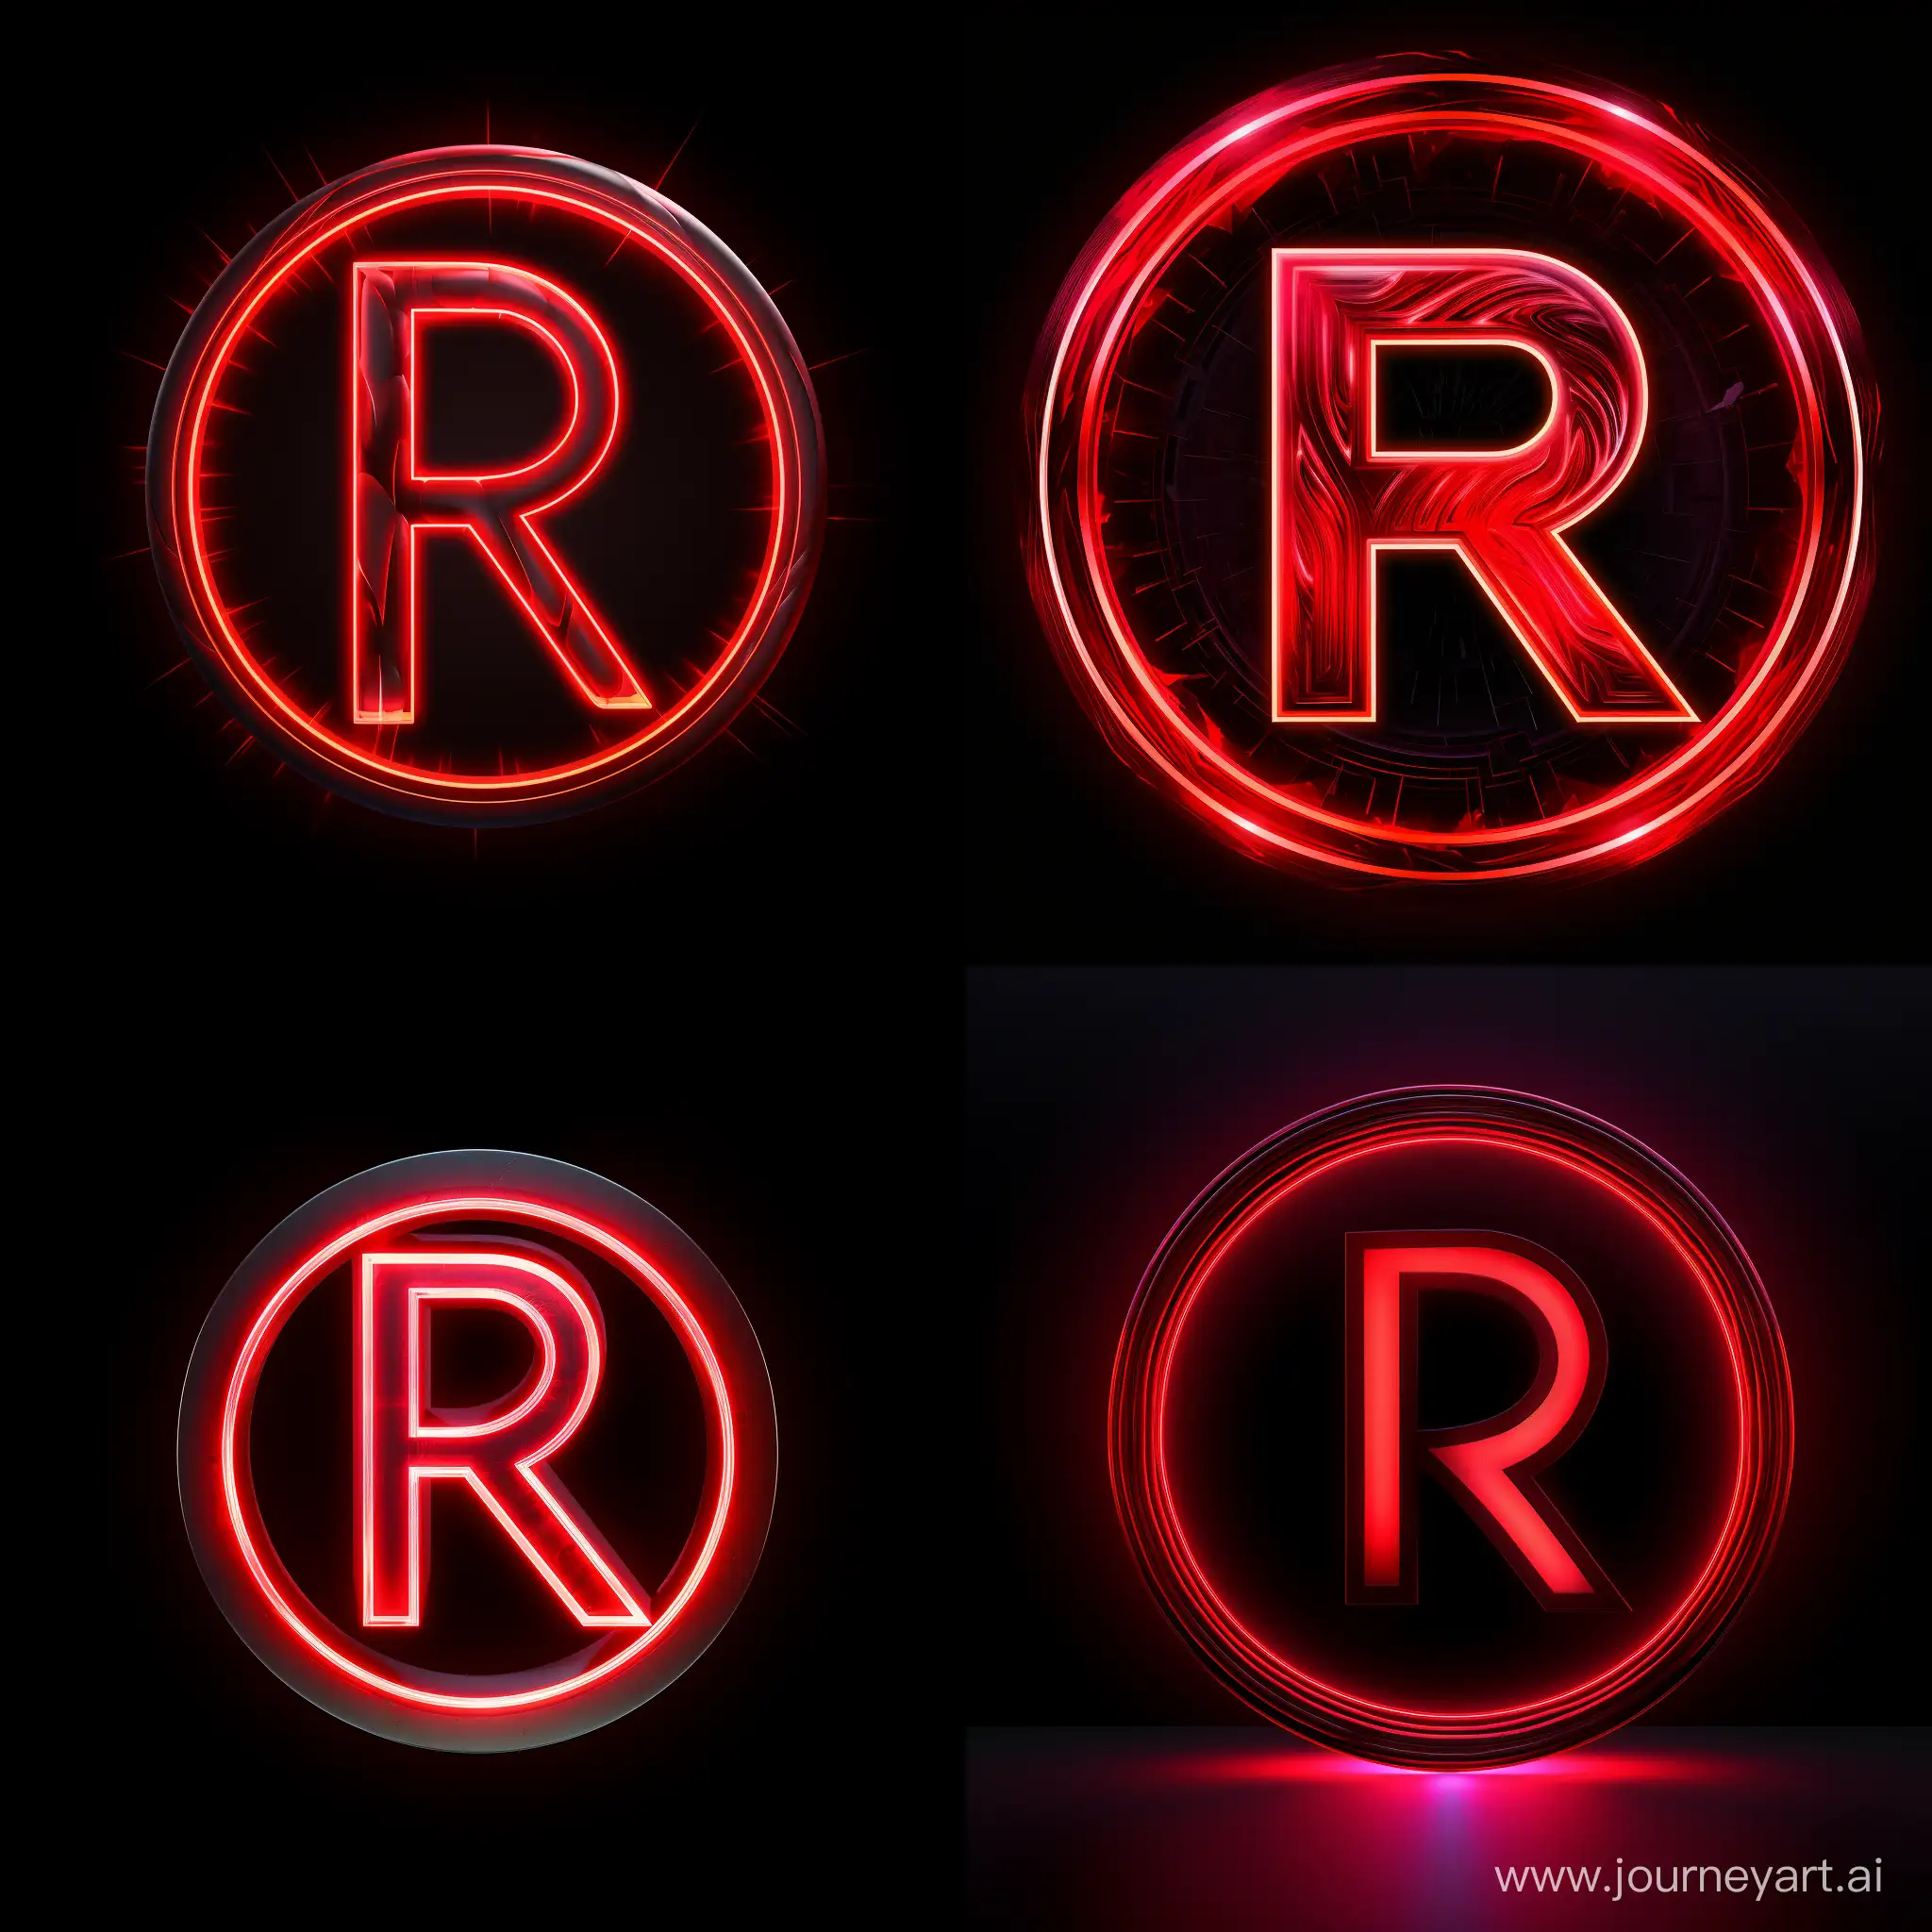 Vibrant-Roblox-Logo-Illuminated-in-Neon-Red-on-Black-Background